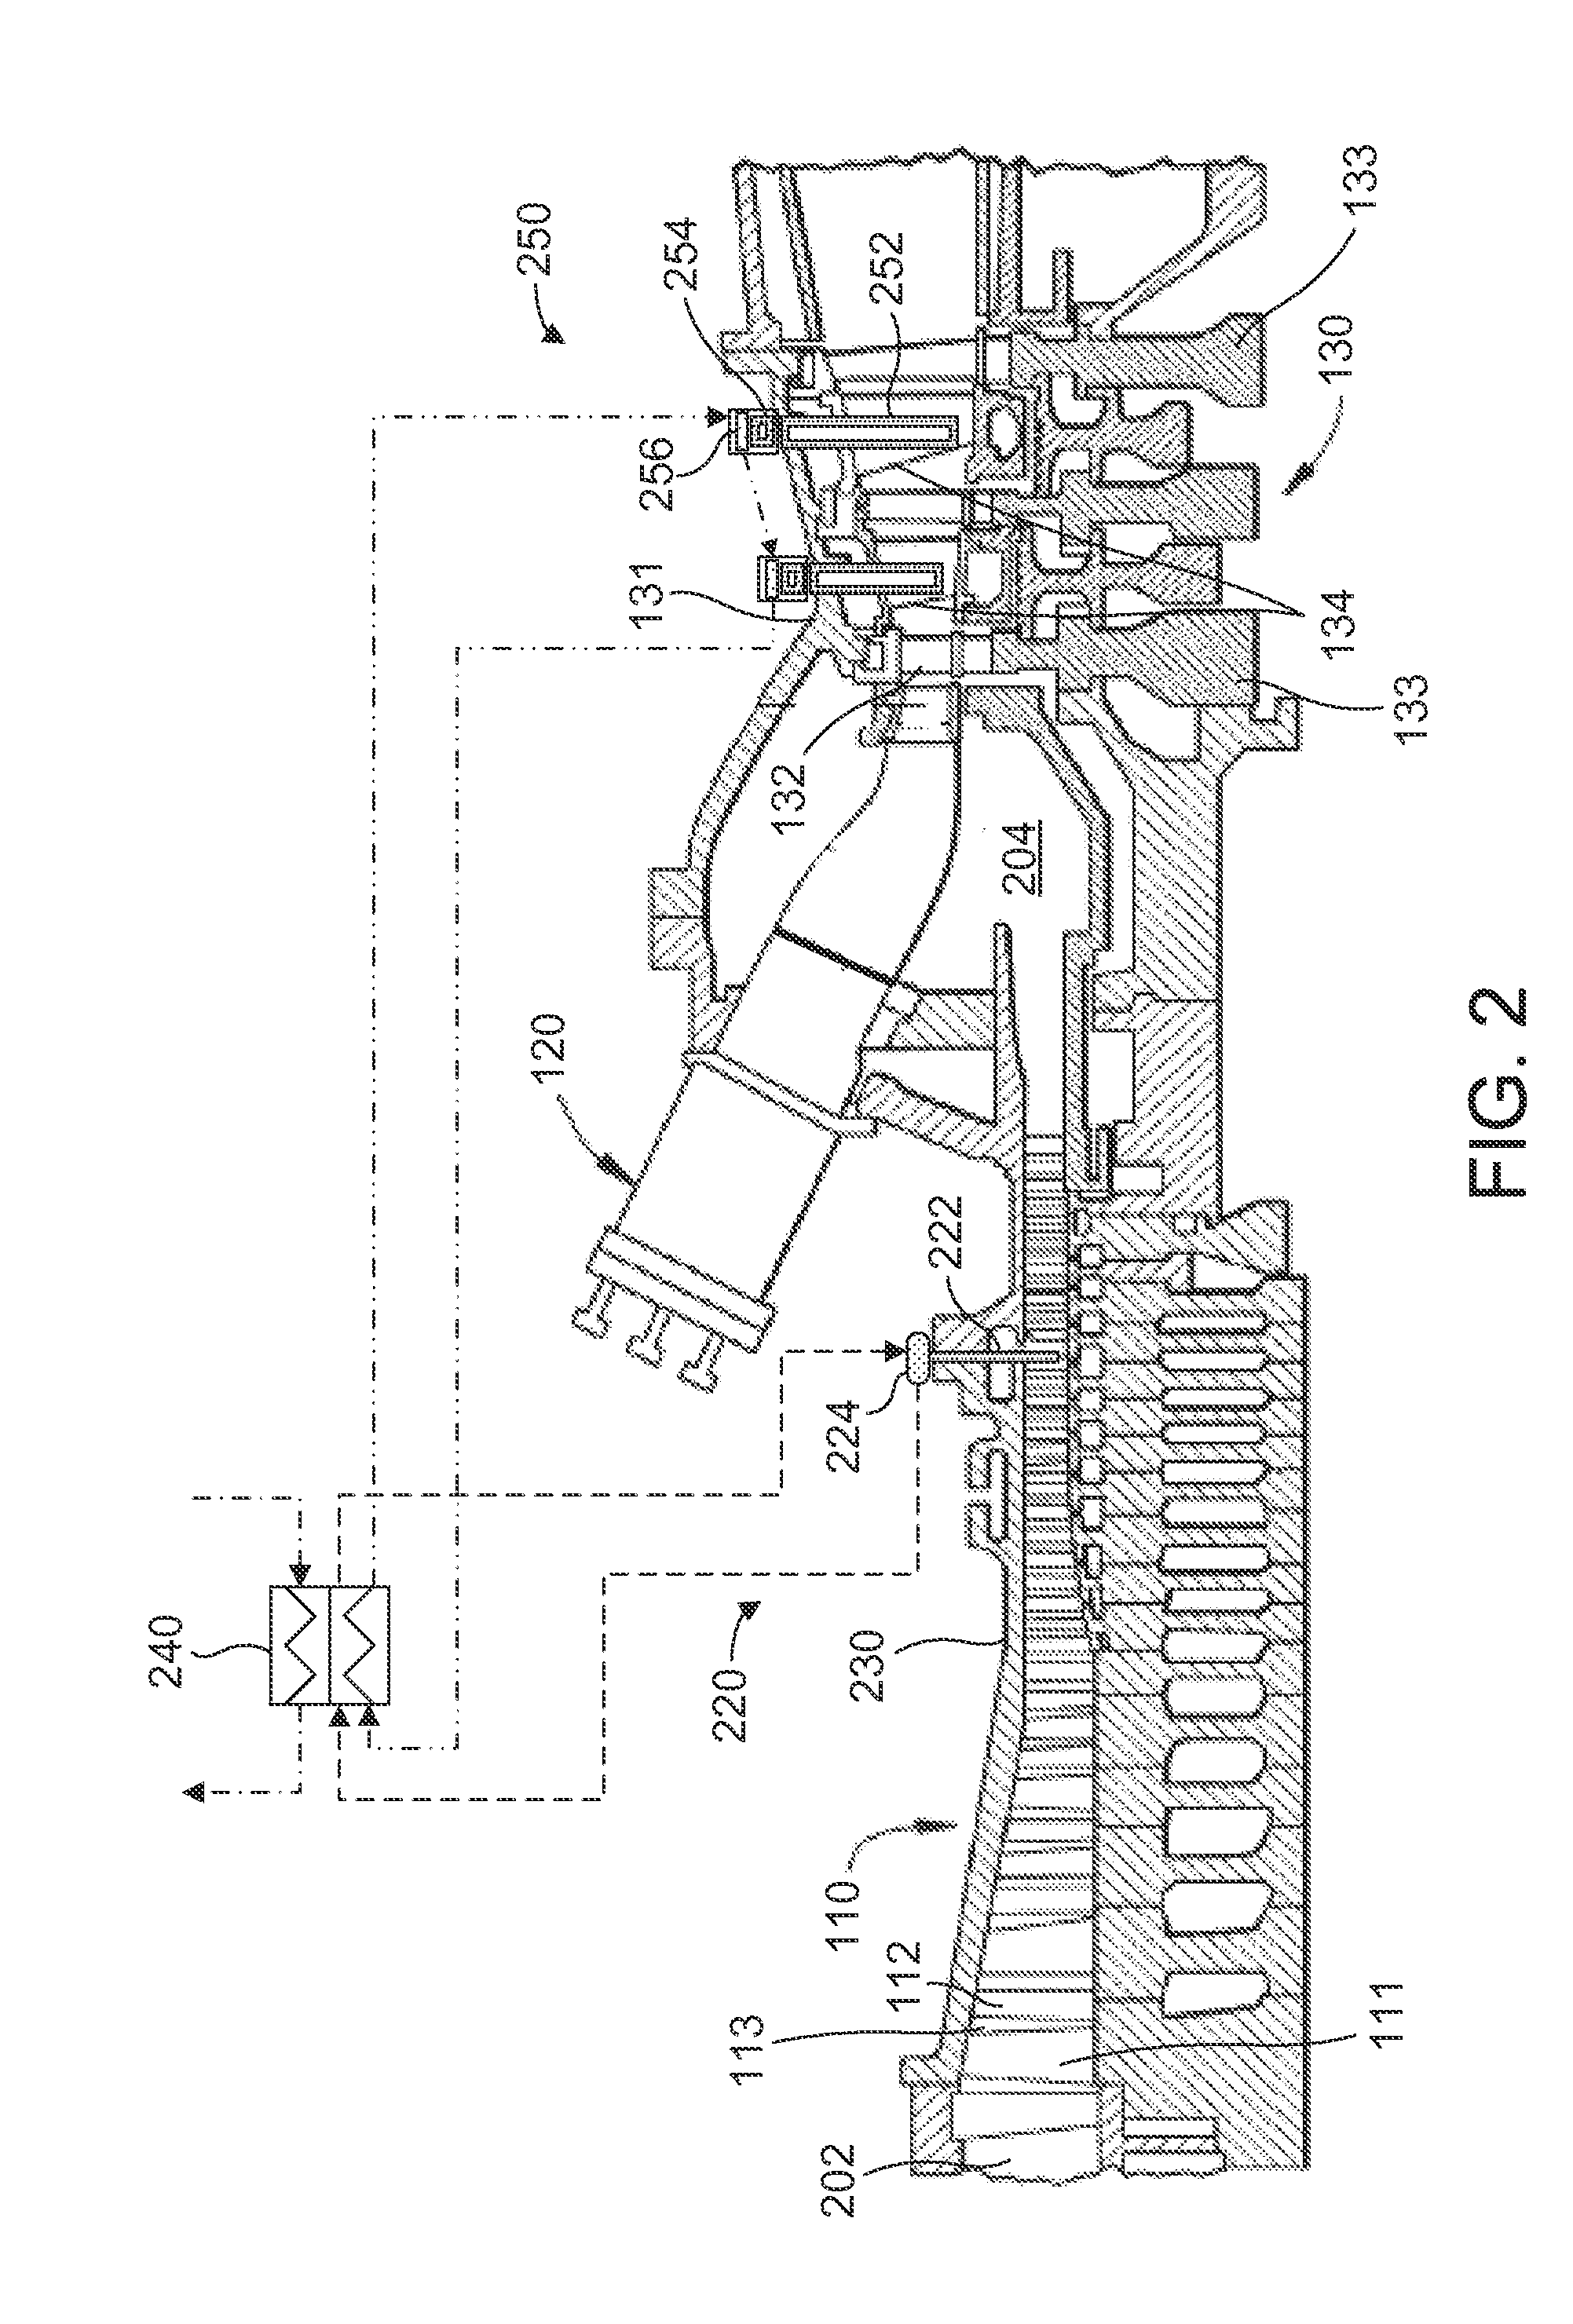 Heat pipe temperature management system for a turbomachine